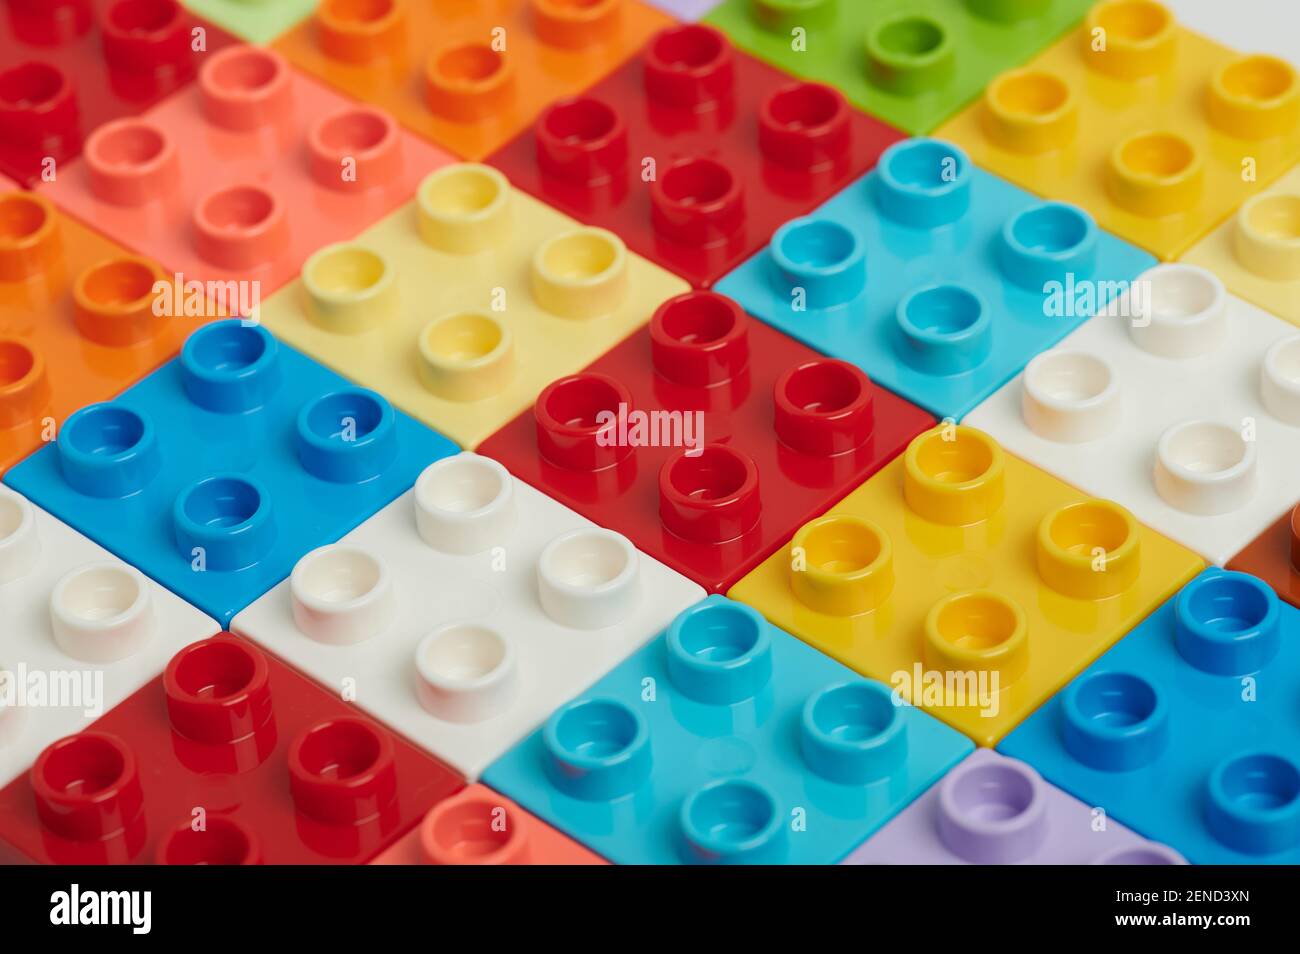 Colorful square toy plastic bricks pattern background Stock Photo